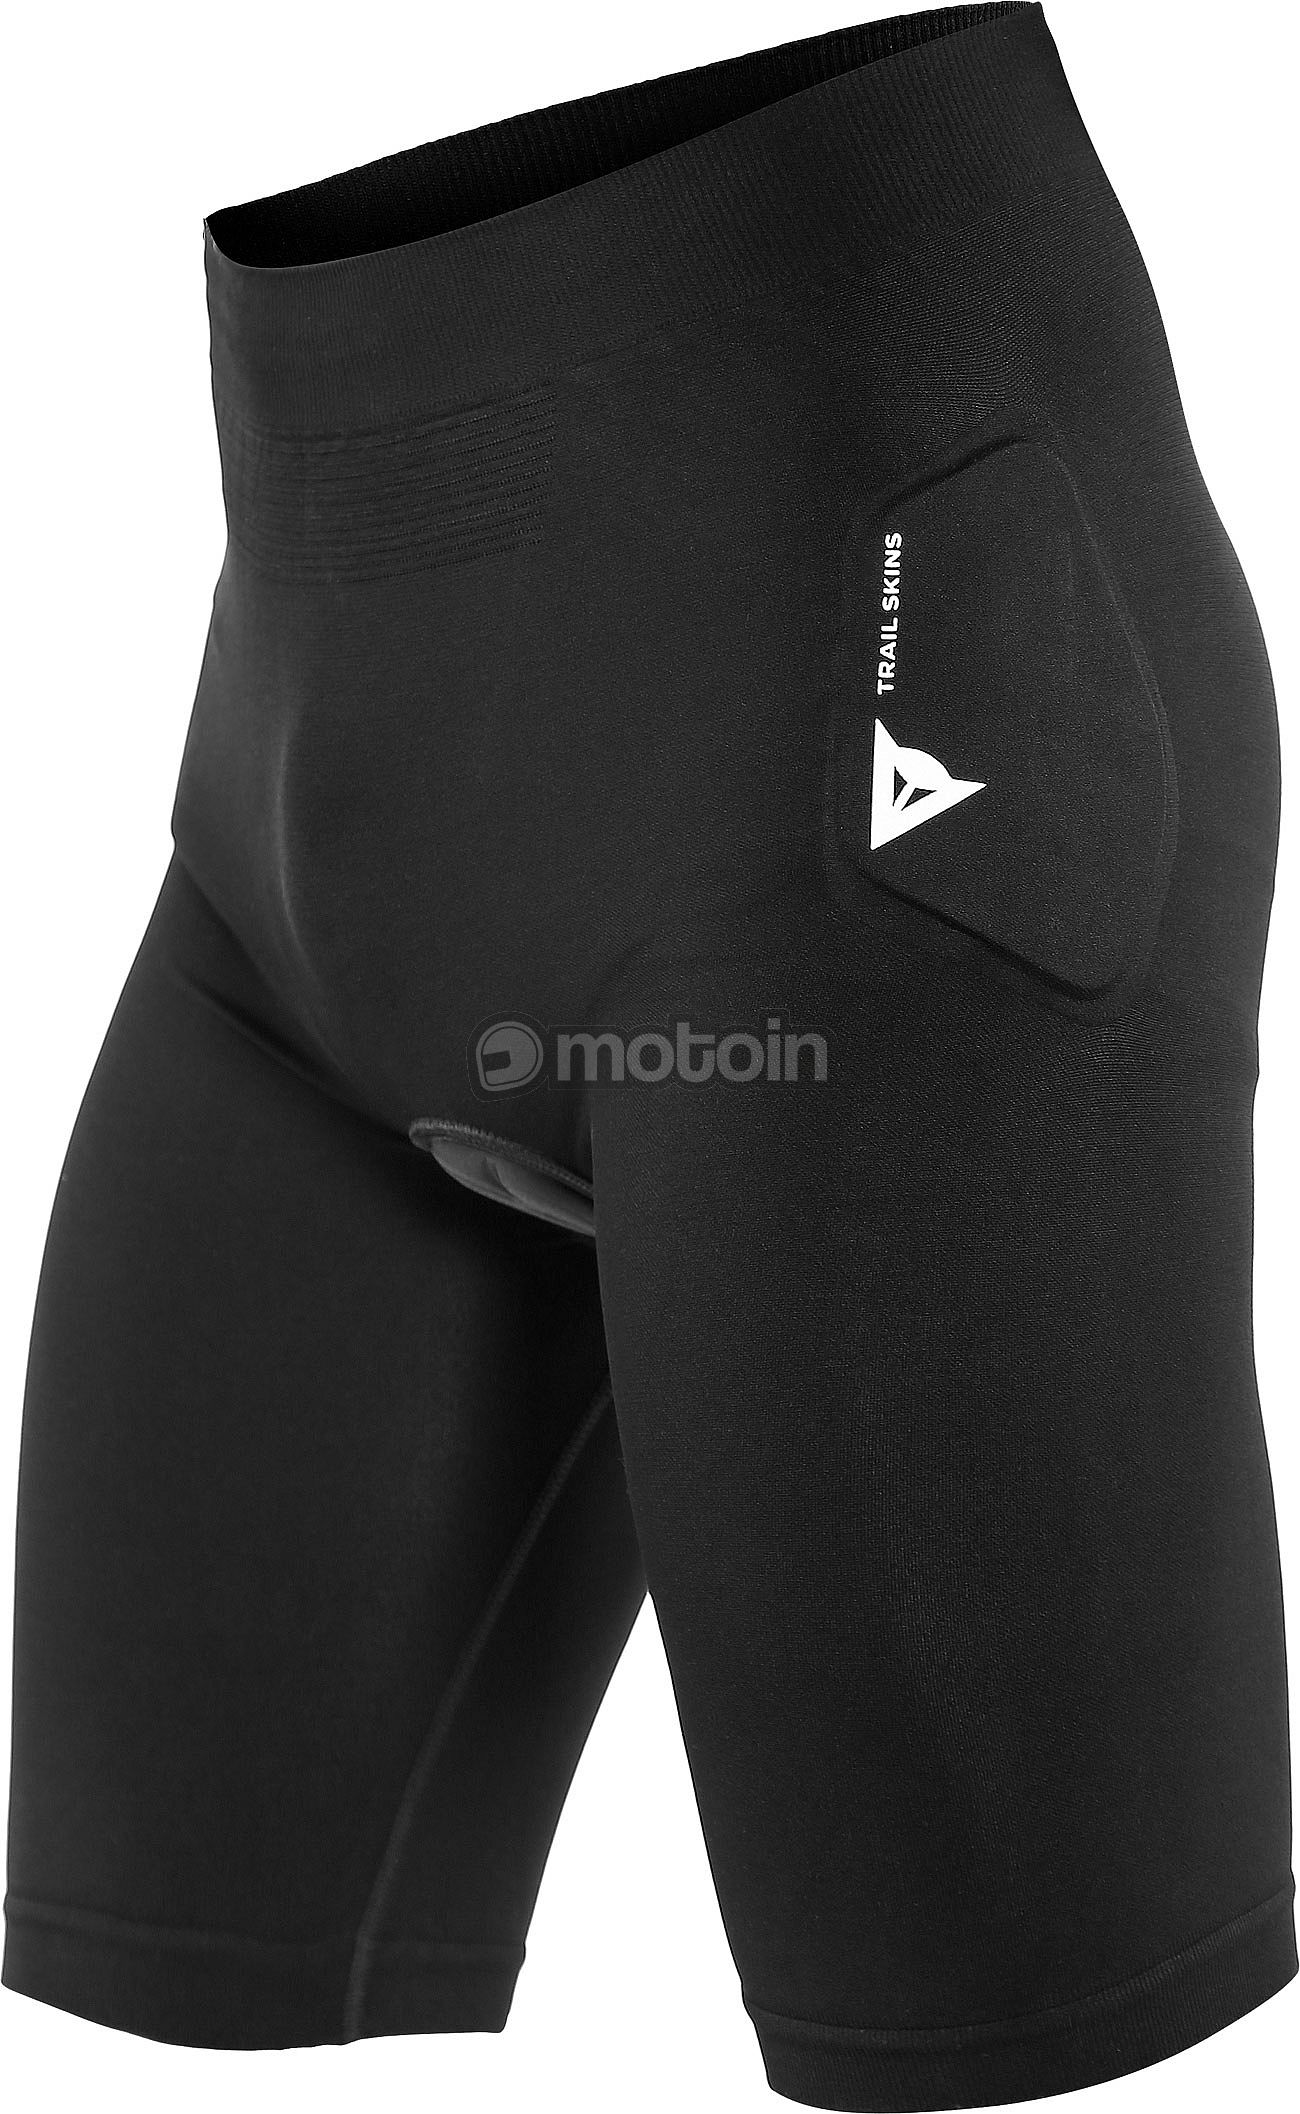 Dainese Trail Skins, Protector shorts